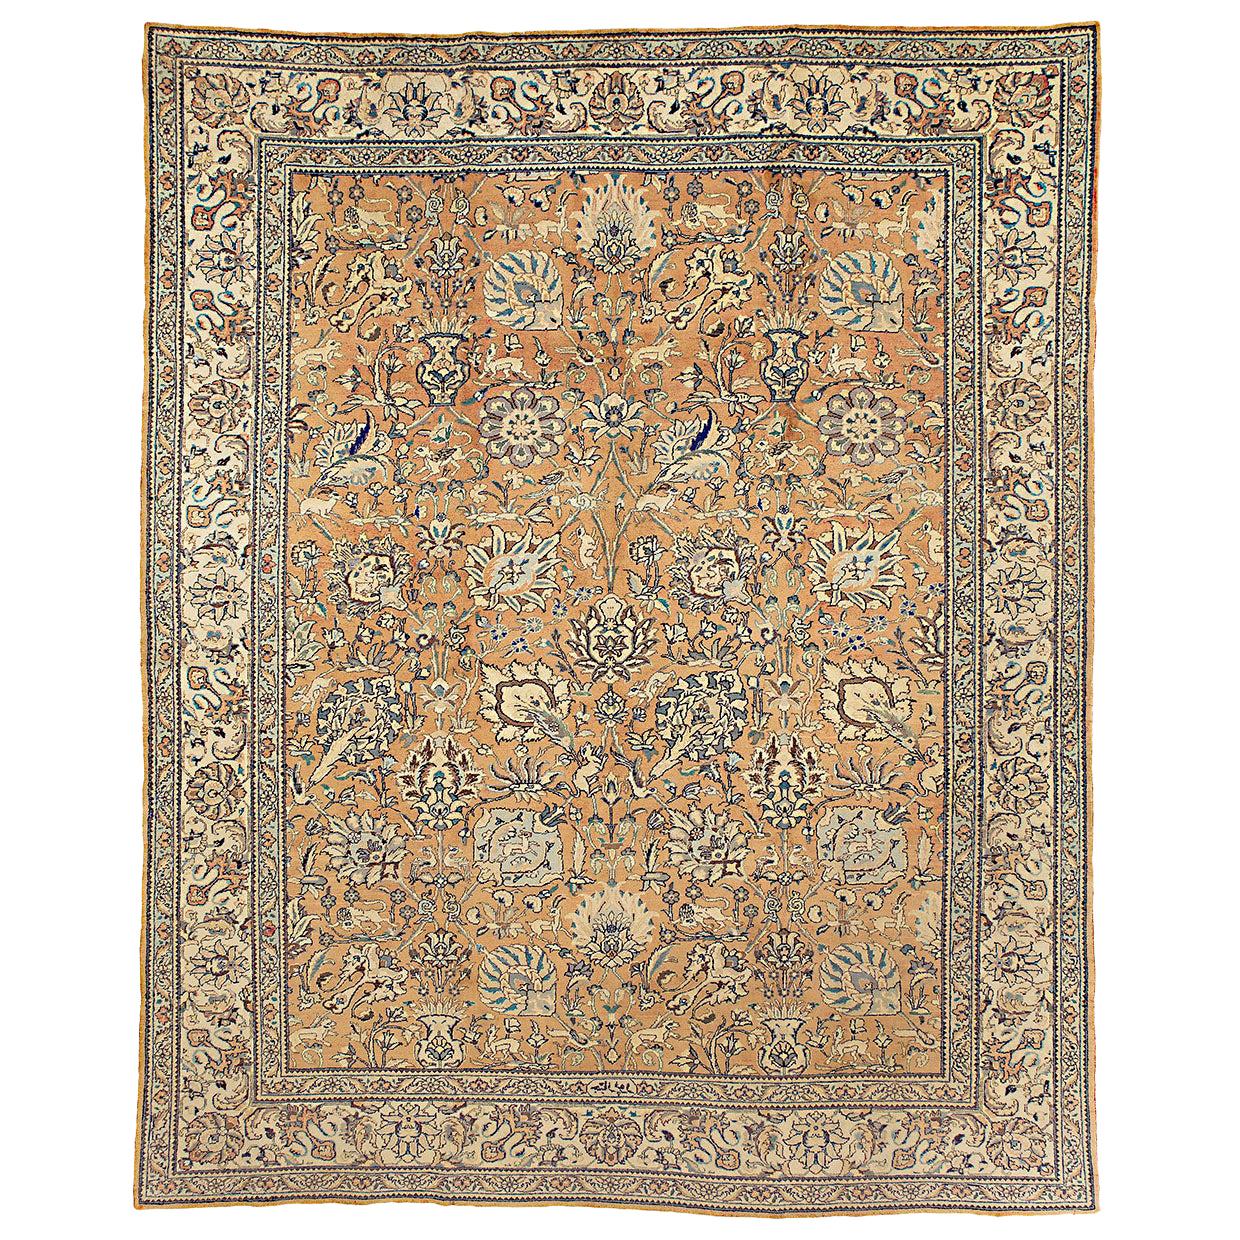 Antique Persian Tabriz Rug from 20th Century with Ivory and Blue Floral Details